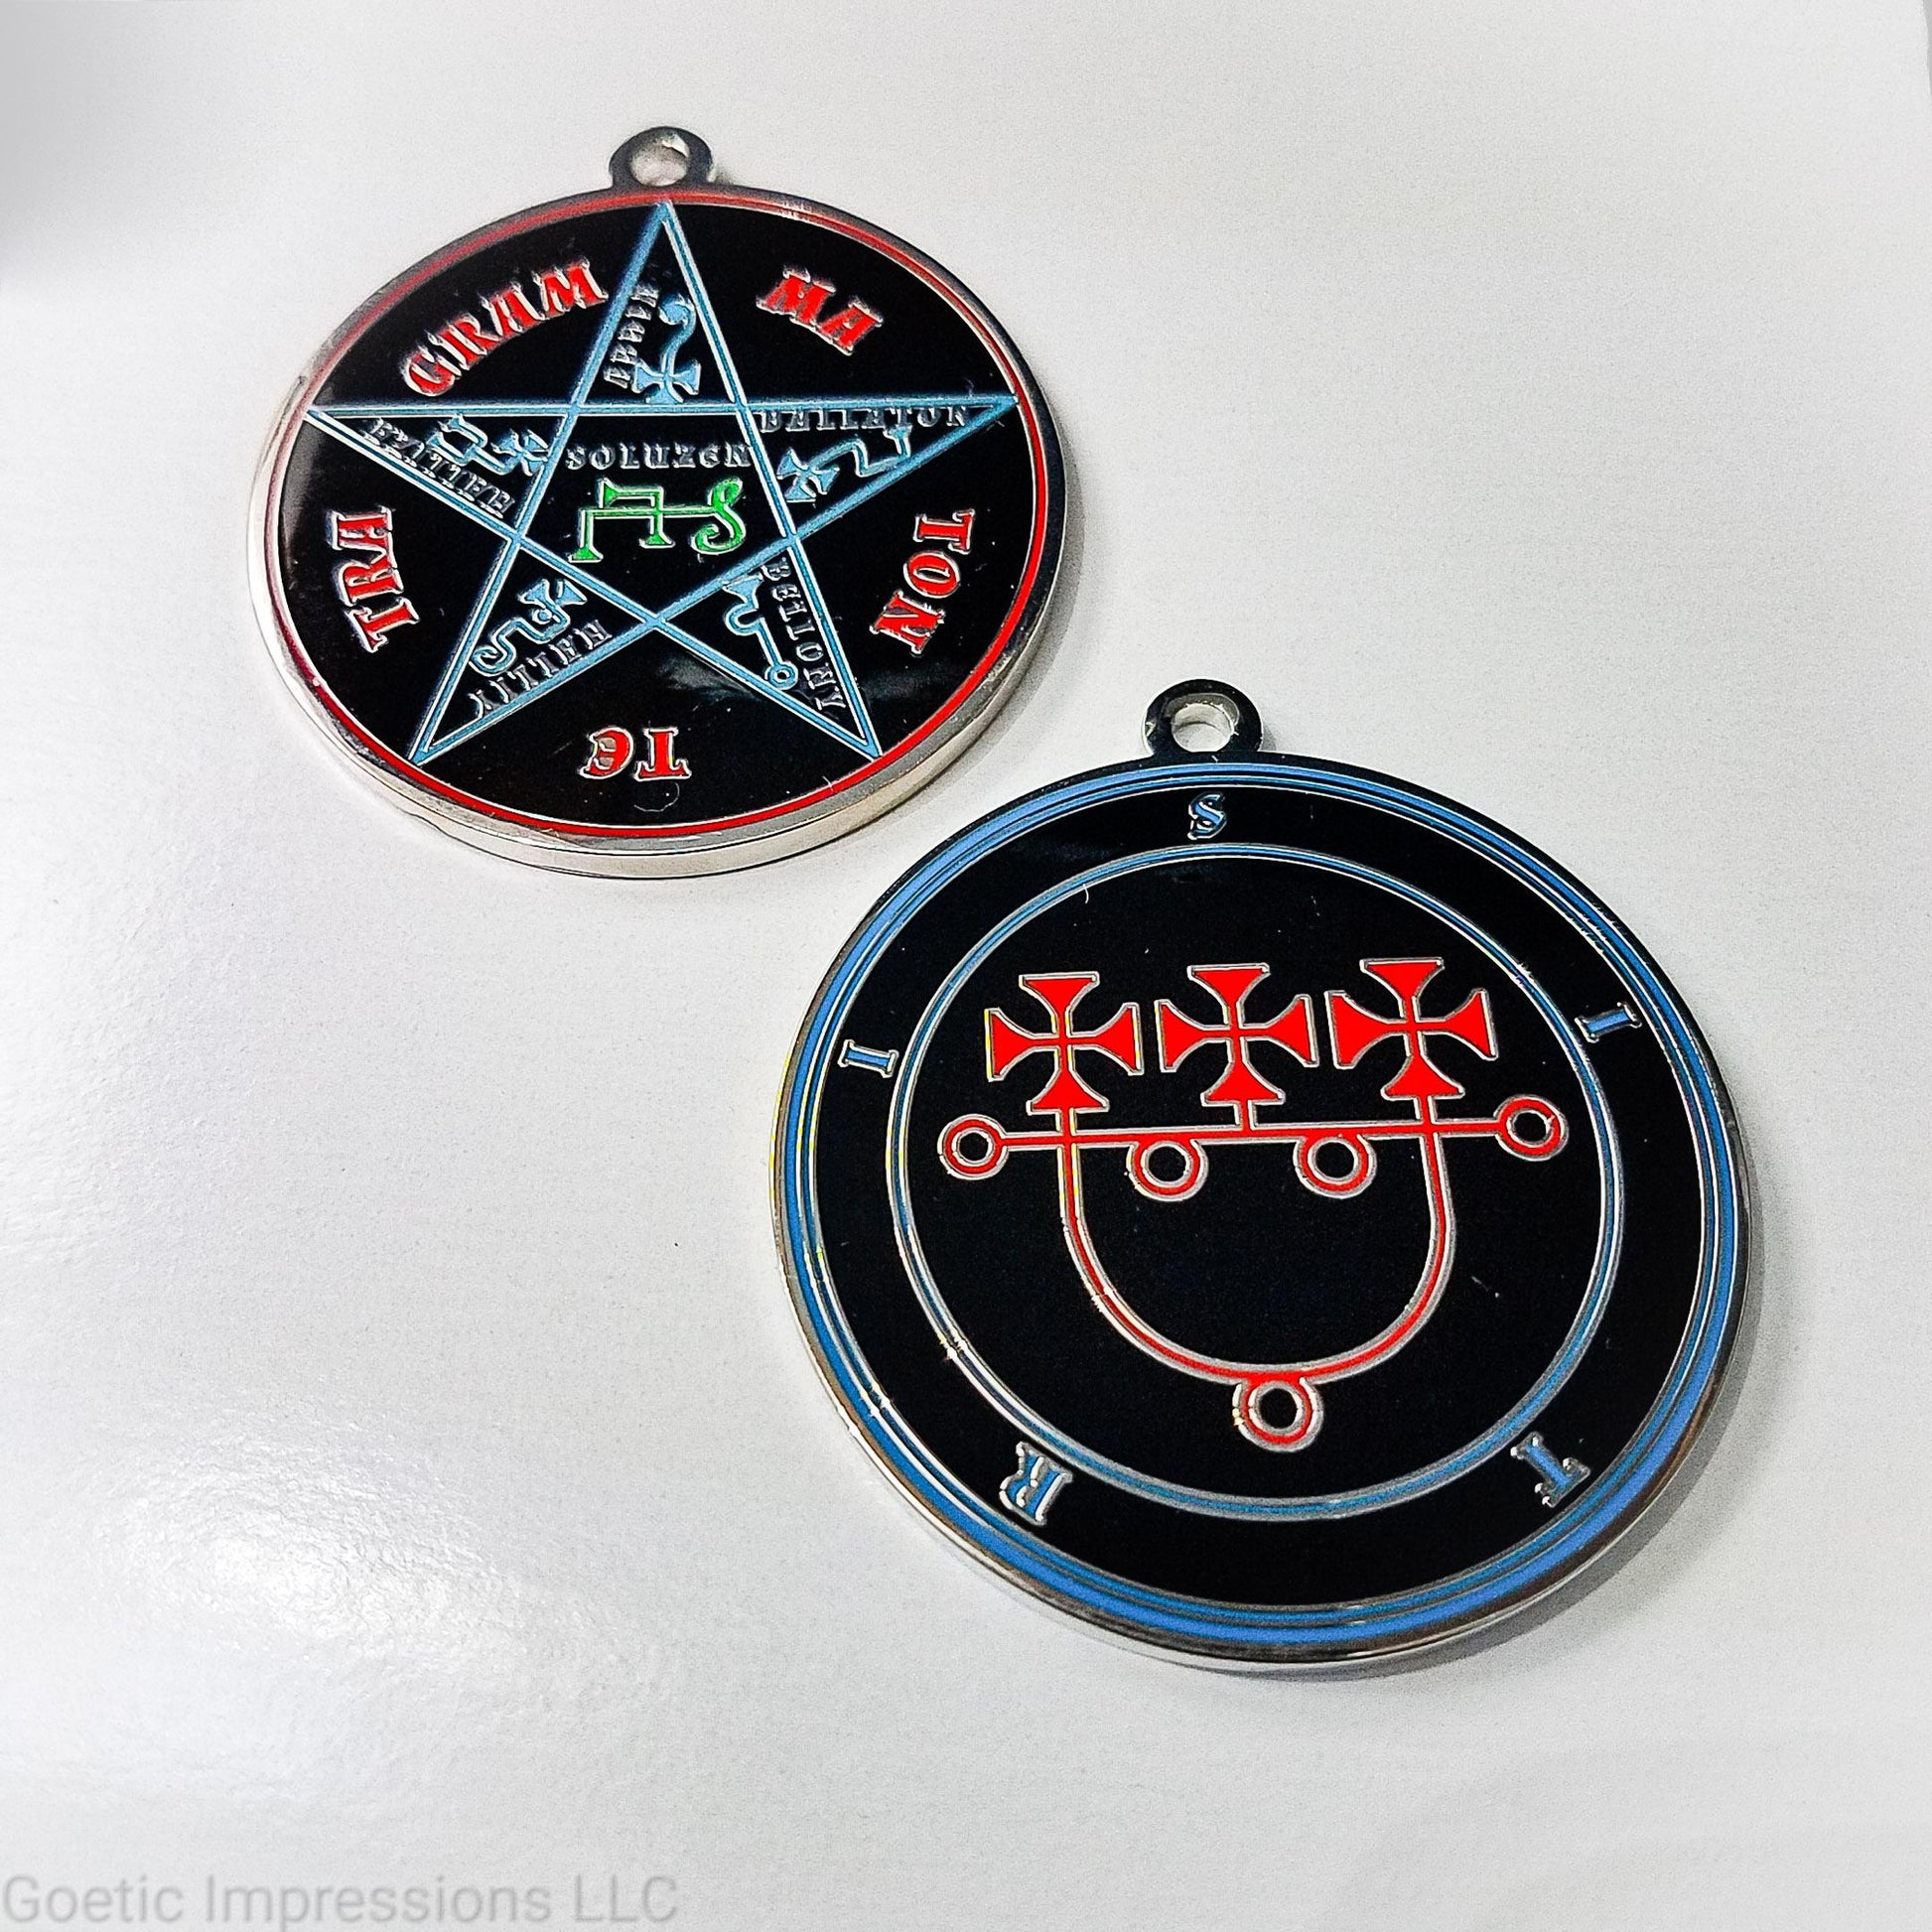 Two medallions showing the front and reverse side of the Goetic Spirit Sitri. The circles and text for Sitri is colored in blue with the sigil in red on a black background. The reverse side is the Pentacle of Solomon with TETRAGRAMMATON text in red, the star and sigils in blue and the center sigil in green. The seal is silver plated.